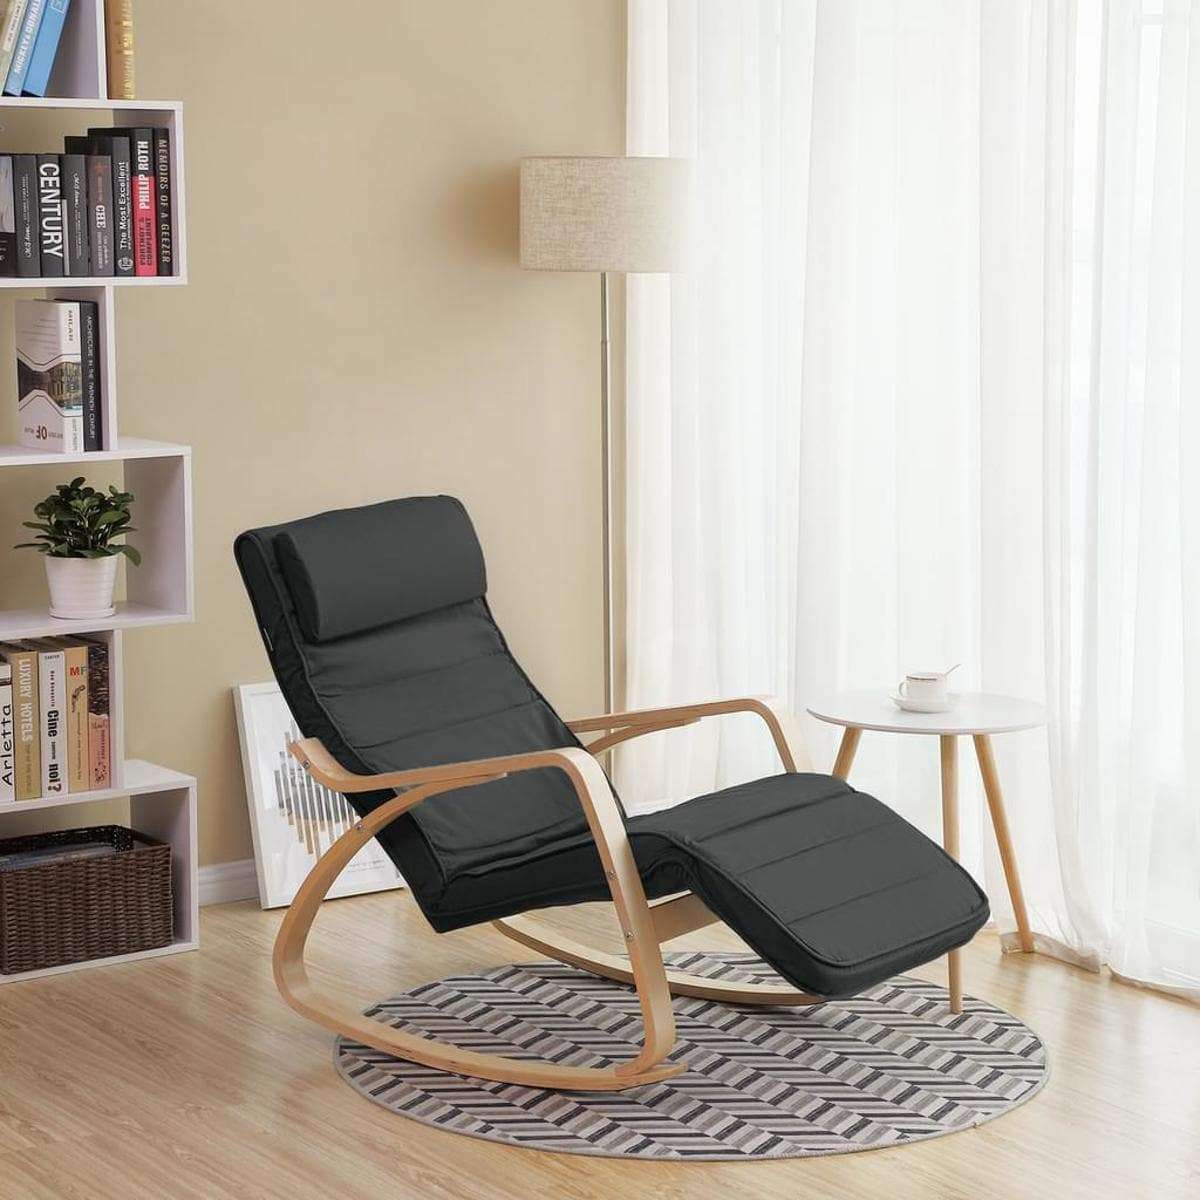 Nancy's Rocking Chair With Footrest - Adjustable Lounger - Relaxation Chair - Linen Fabric - Gray